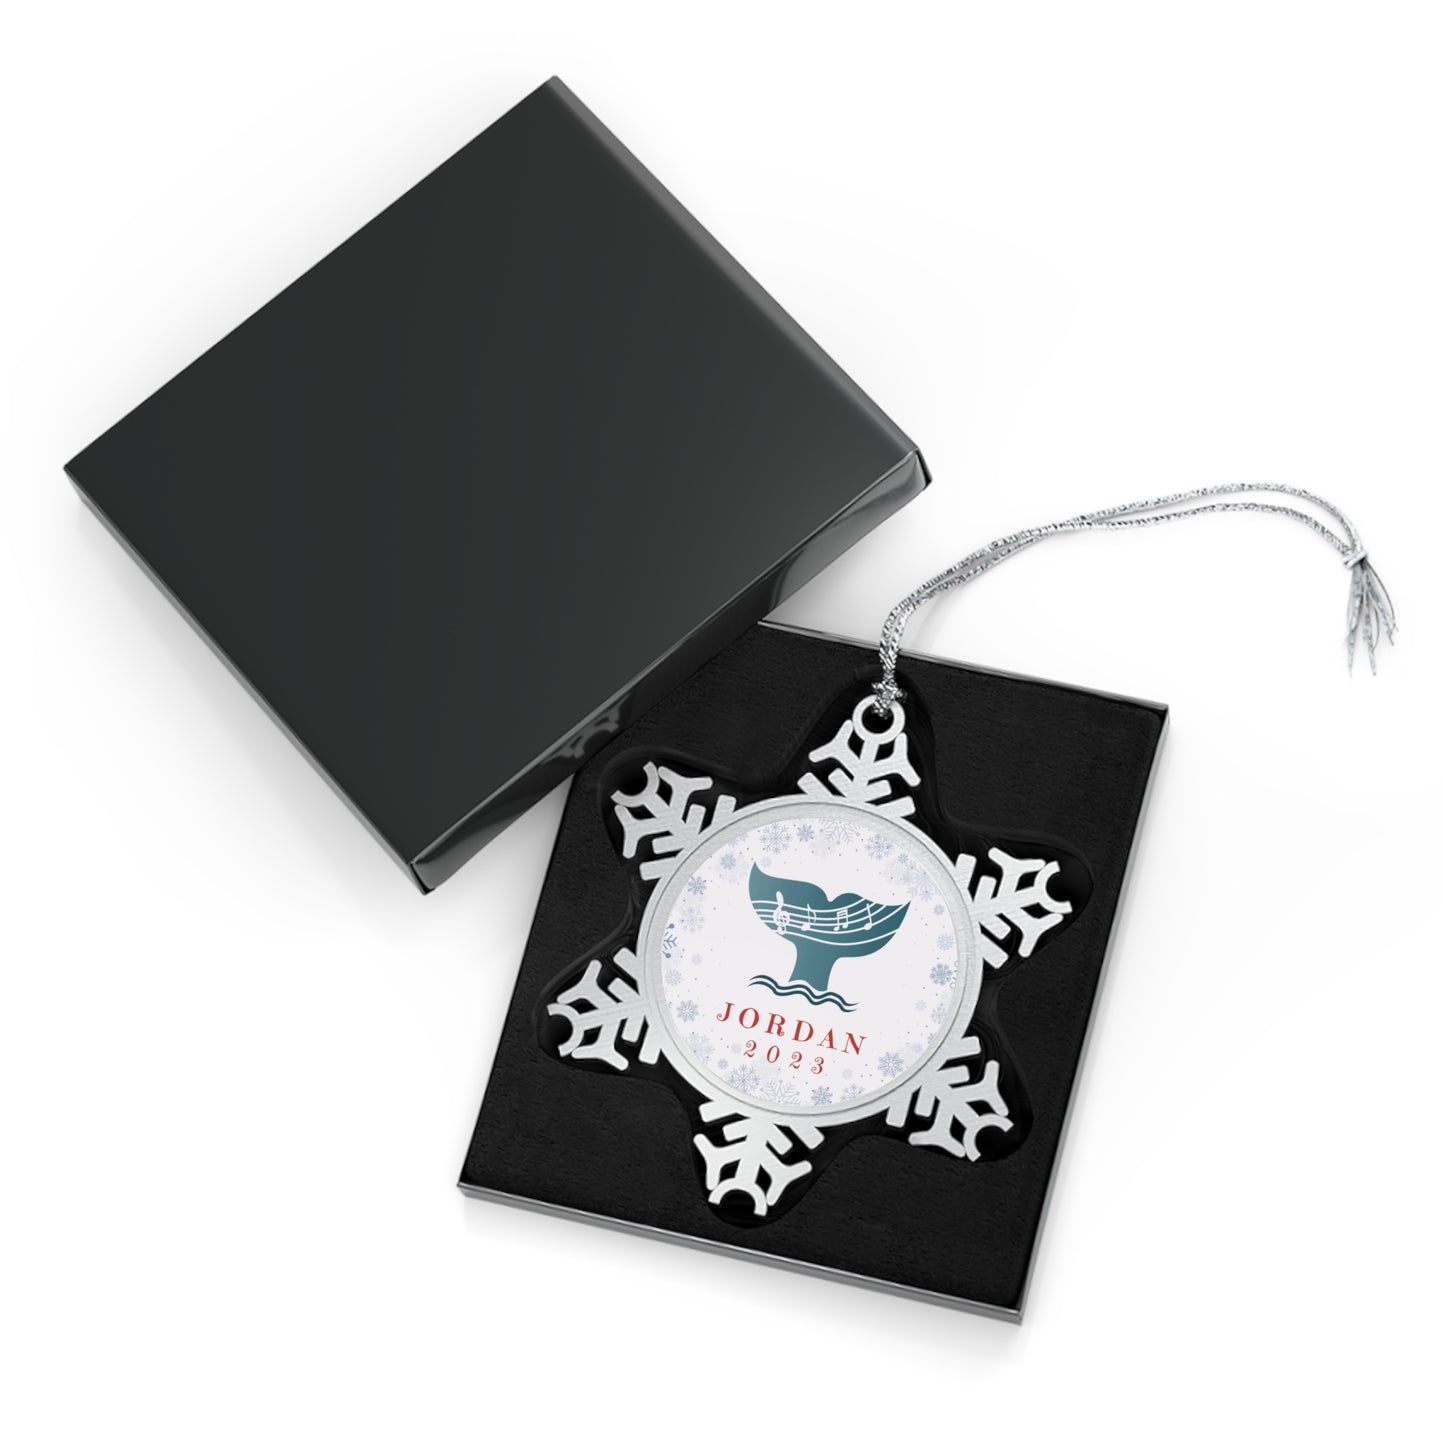 Personalised Pewter Snowflake Ornament | Music Whale Tail